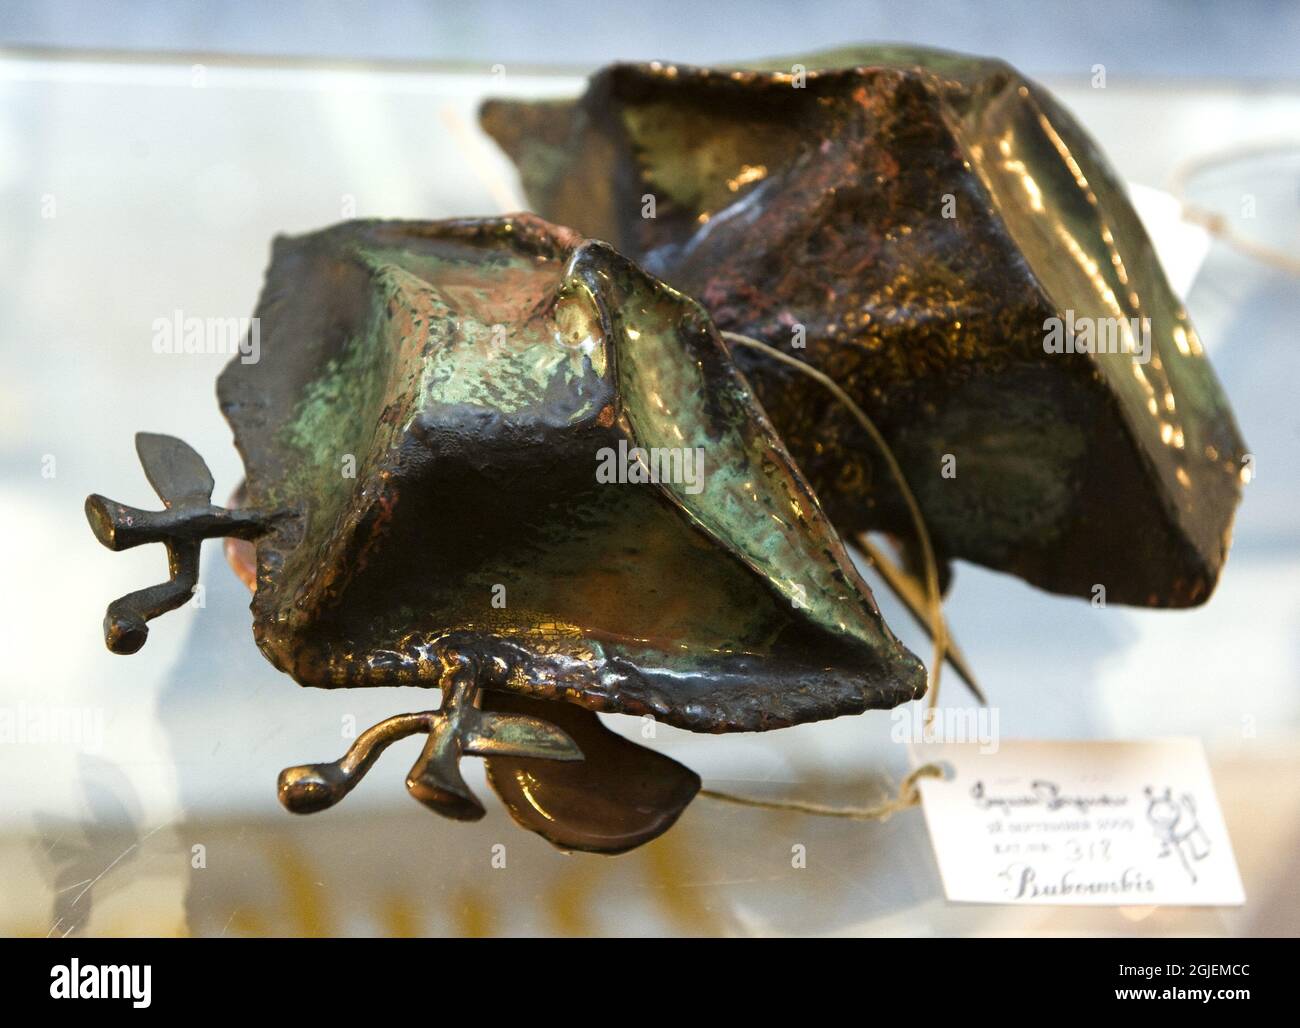 Ingmar Bergman's Guldbagge (a Swedish film award) is seen on display at the Bukowski's Auction House in Stockholm, Sweden. Bergman's private belongings will go on sale at auction September 28, 2009. Stock Photo